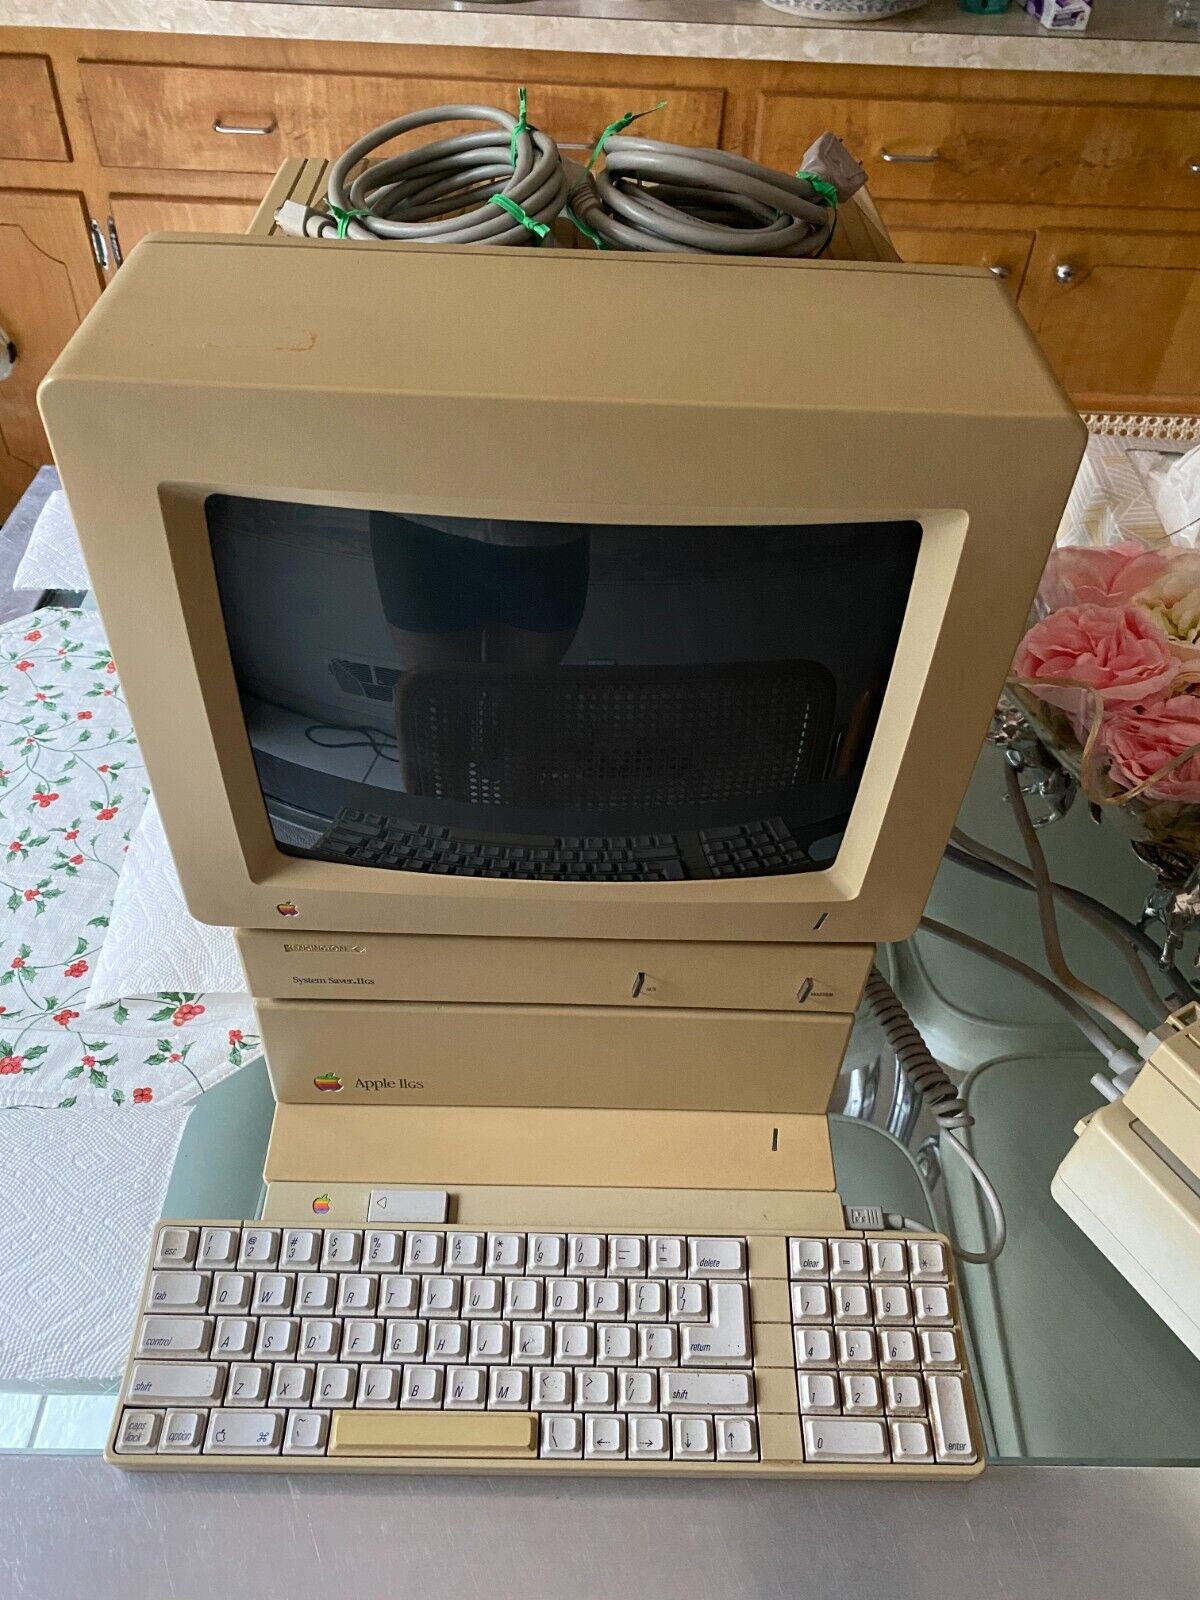 Apple IIGS Vintage Computer - Complete Working System with Software